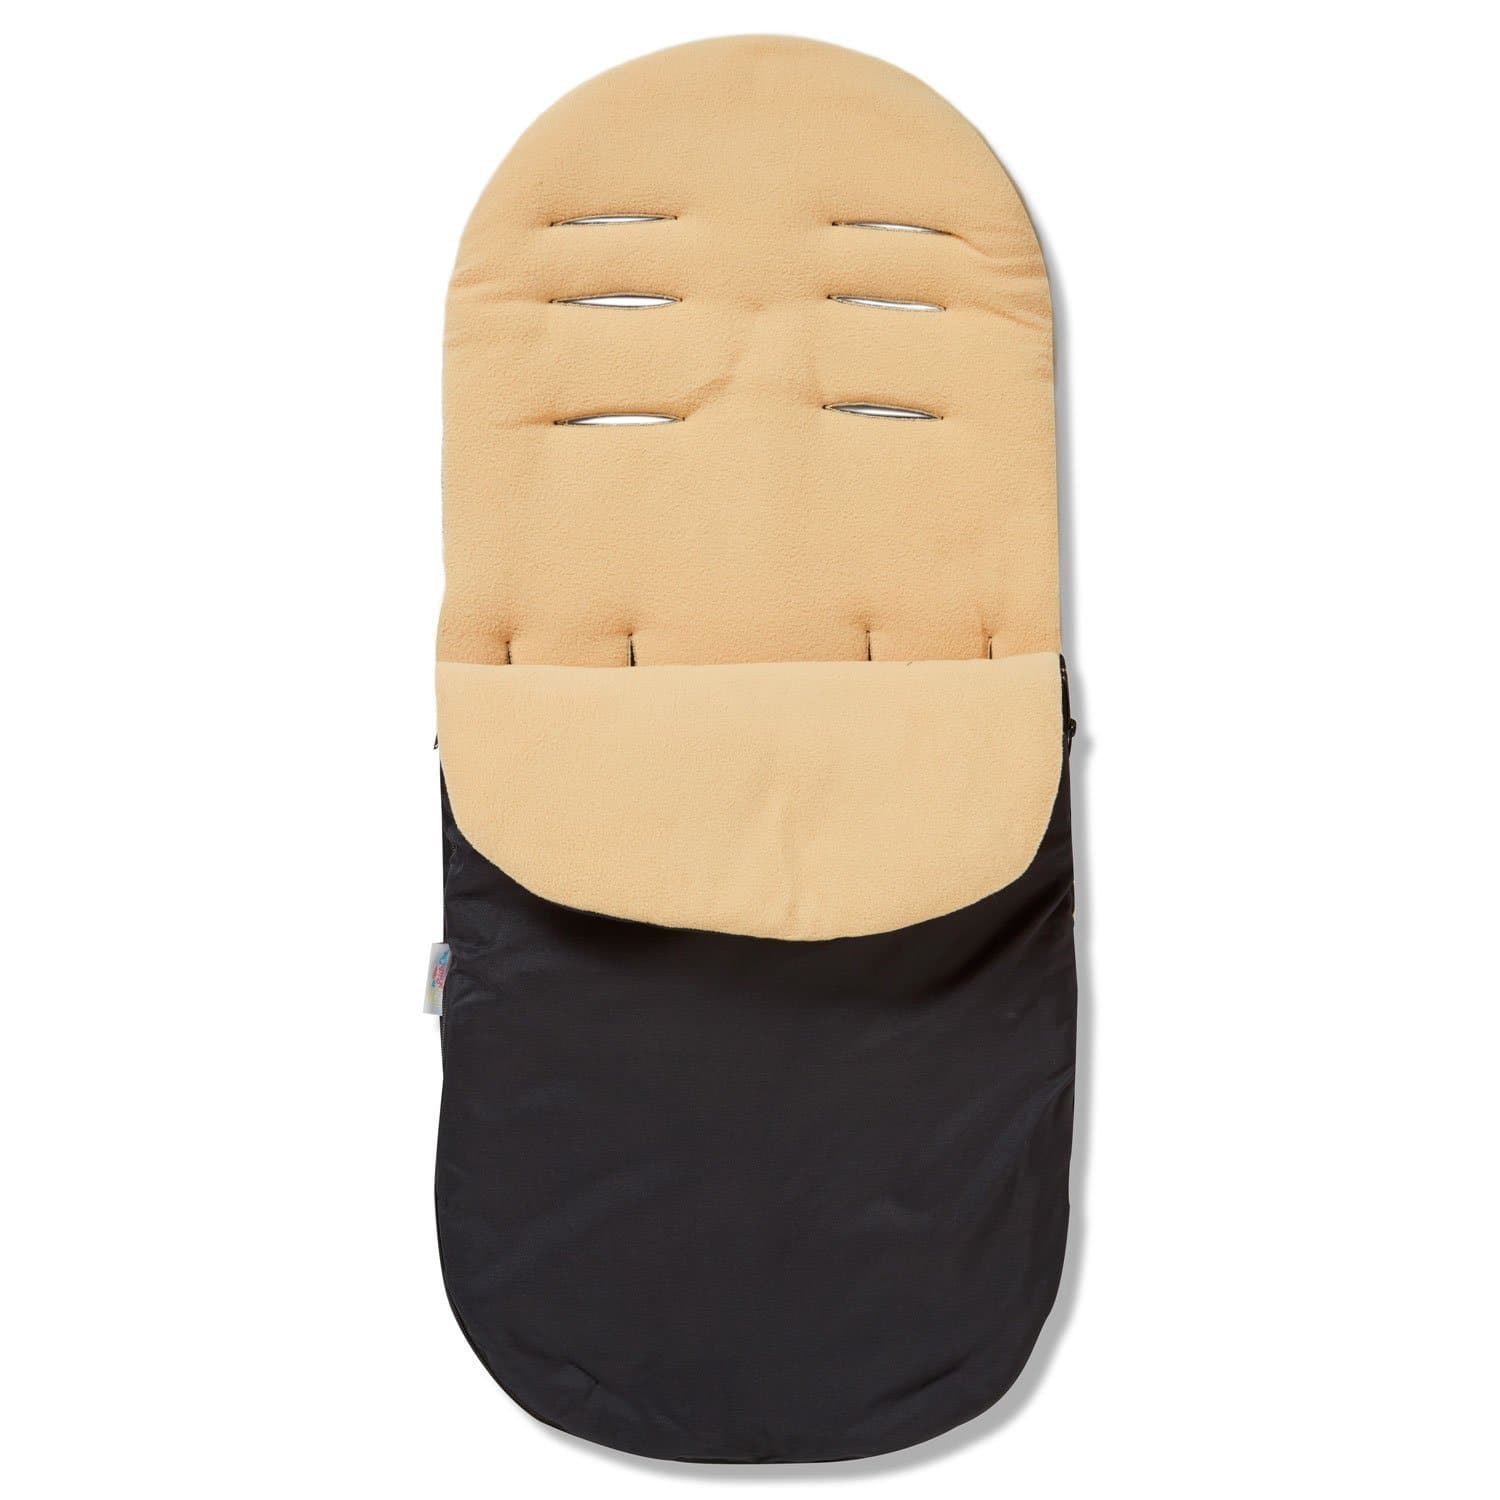 Footmuff / Cosy Toes Compatible with Teutonia - Sand / Fits All Models | For Your Little One